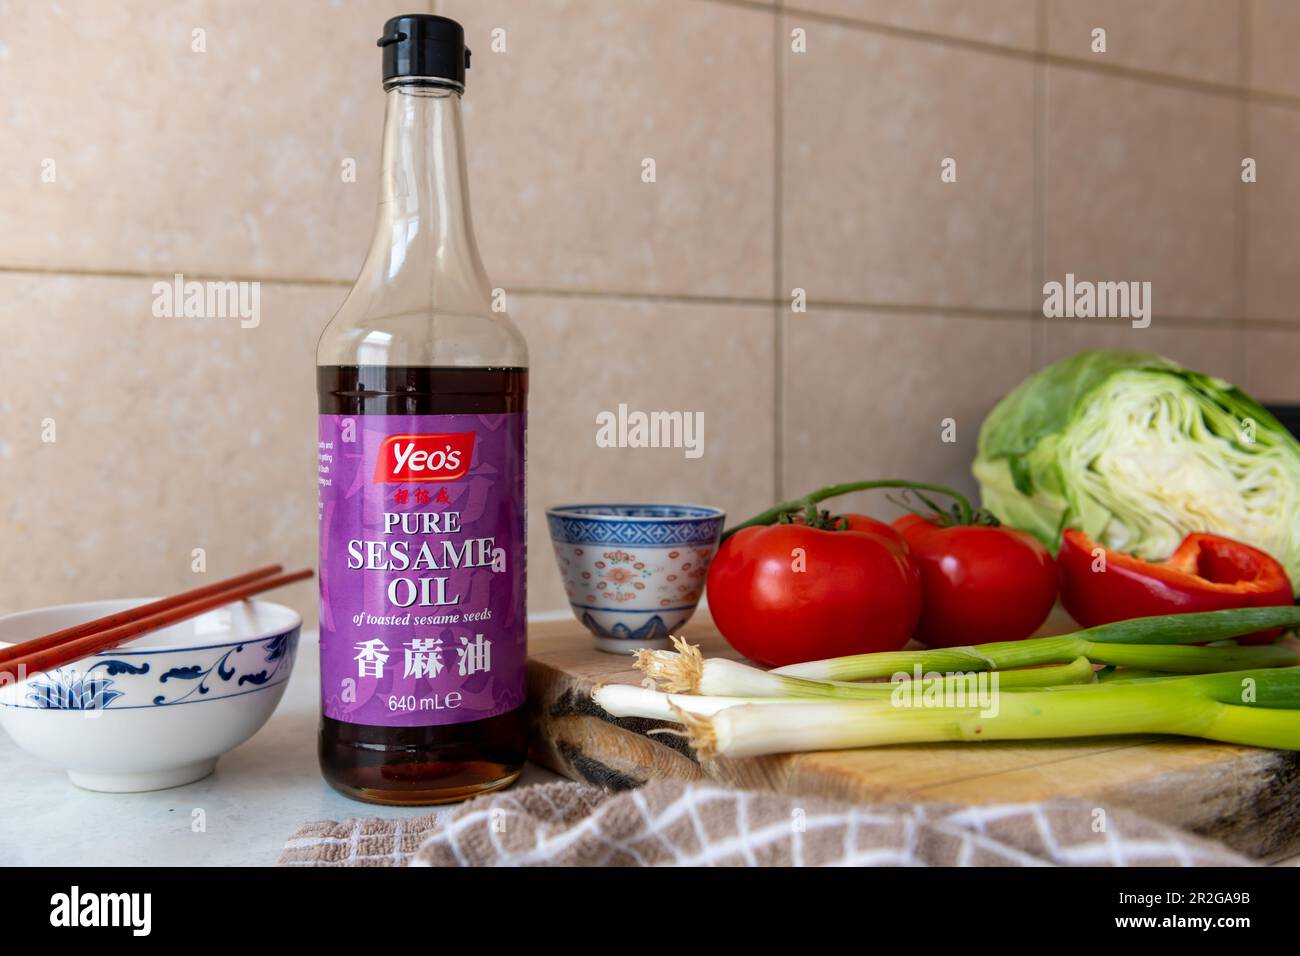 London. UK- 05.14.2023. A bottle of Yeo's pure sesame oil in a kitchen work top. Stock Photo